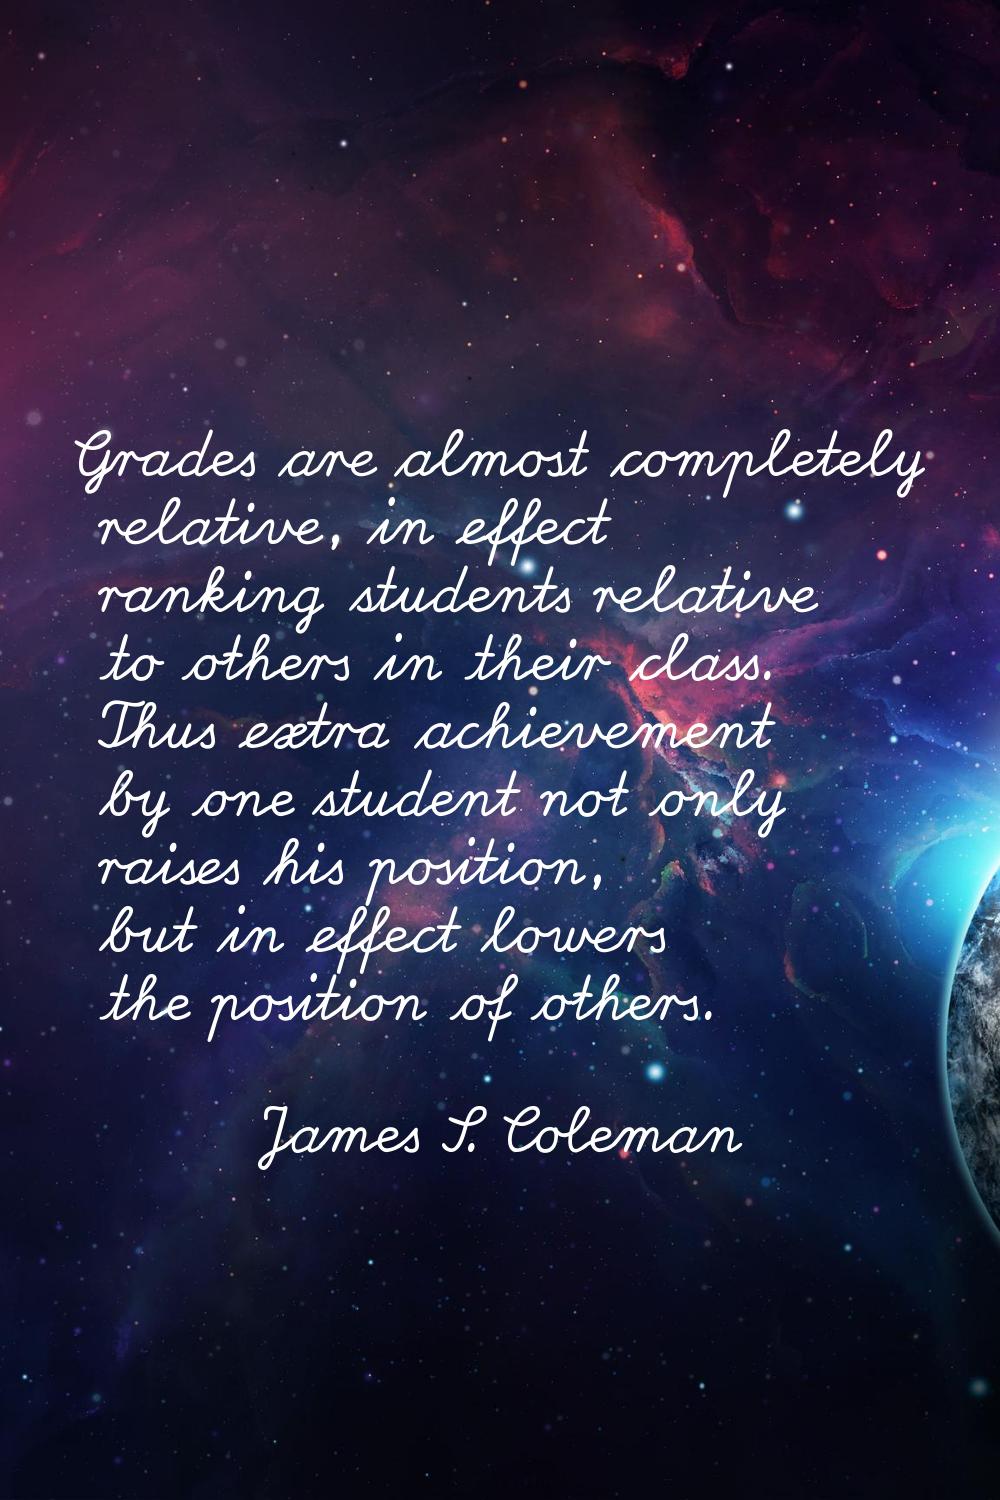 Grades are almost completely relative, in effect ranking students relative to others in their class